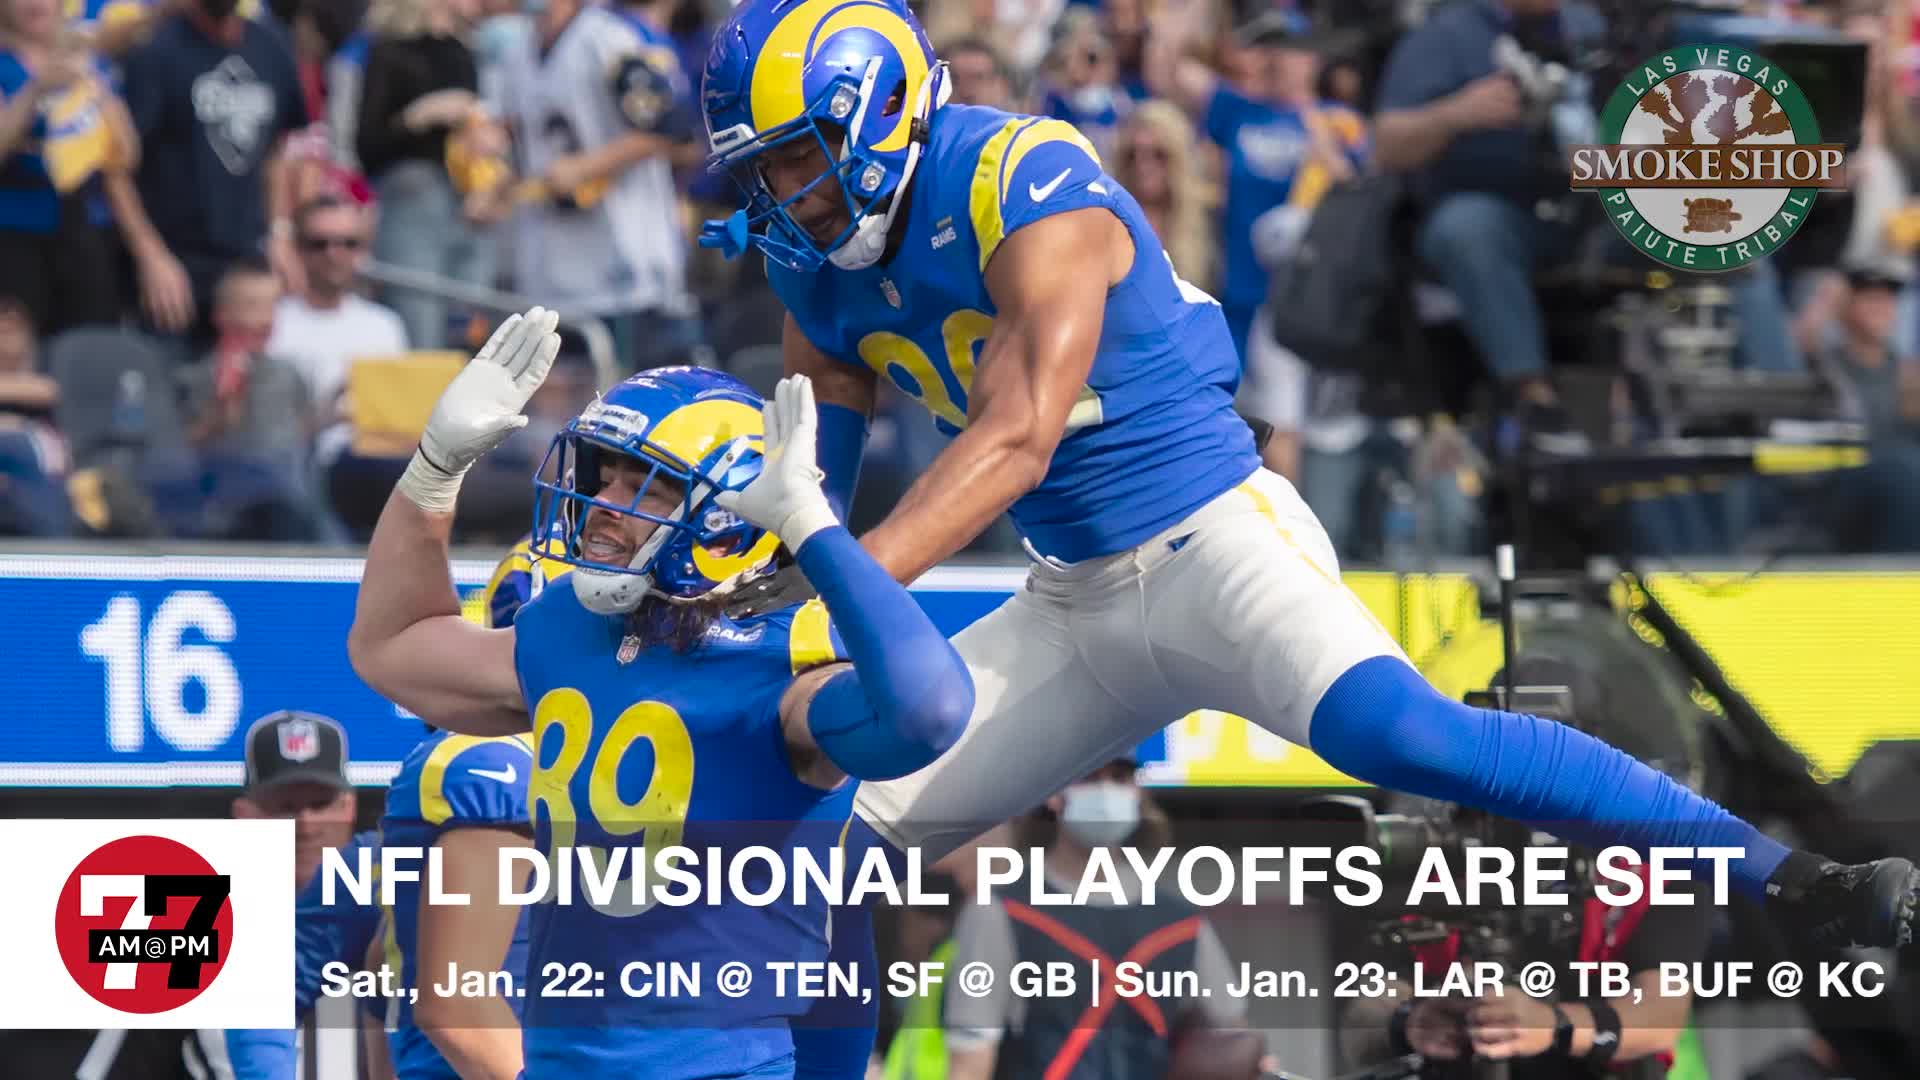 7@7PM NFL Divisional Playoffs are Set